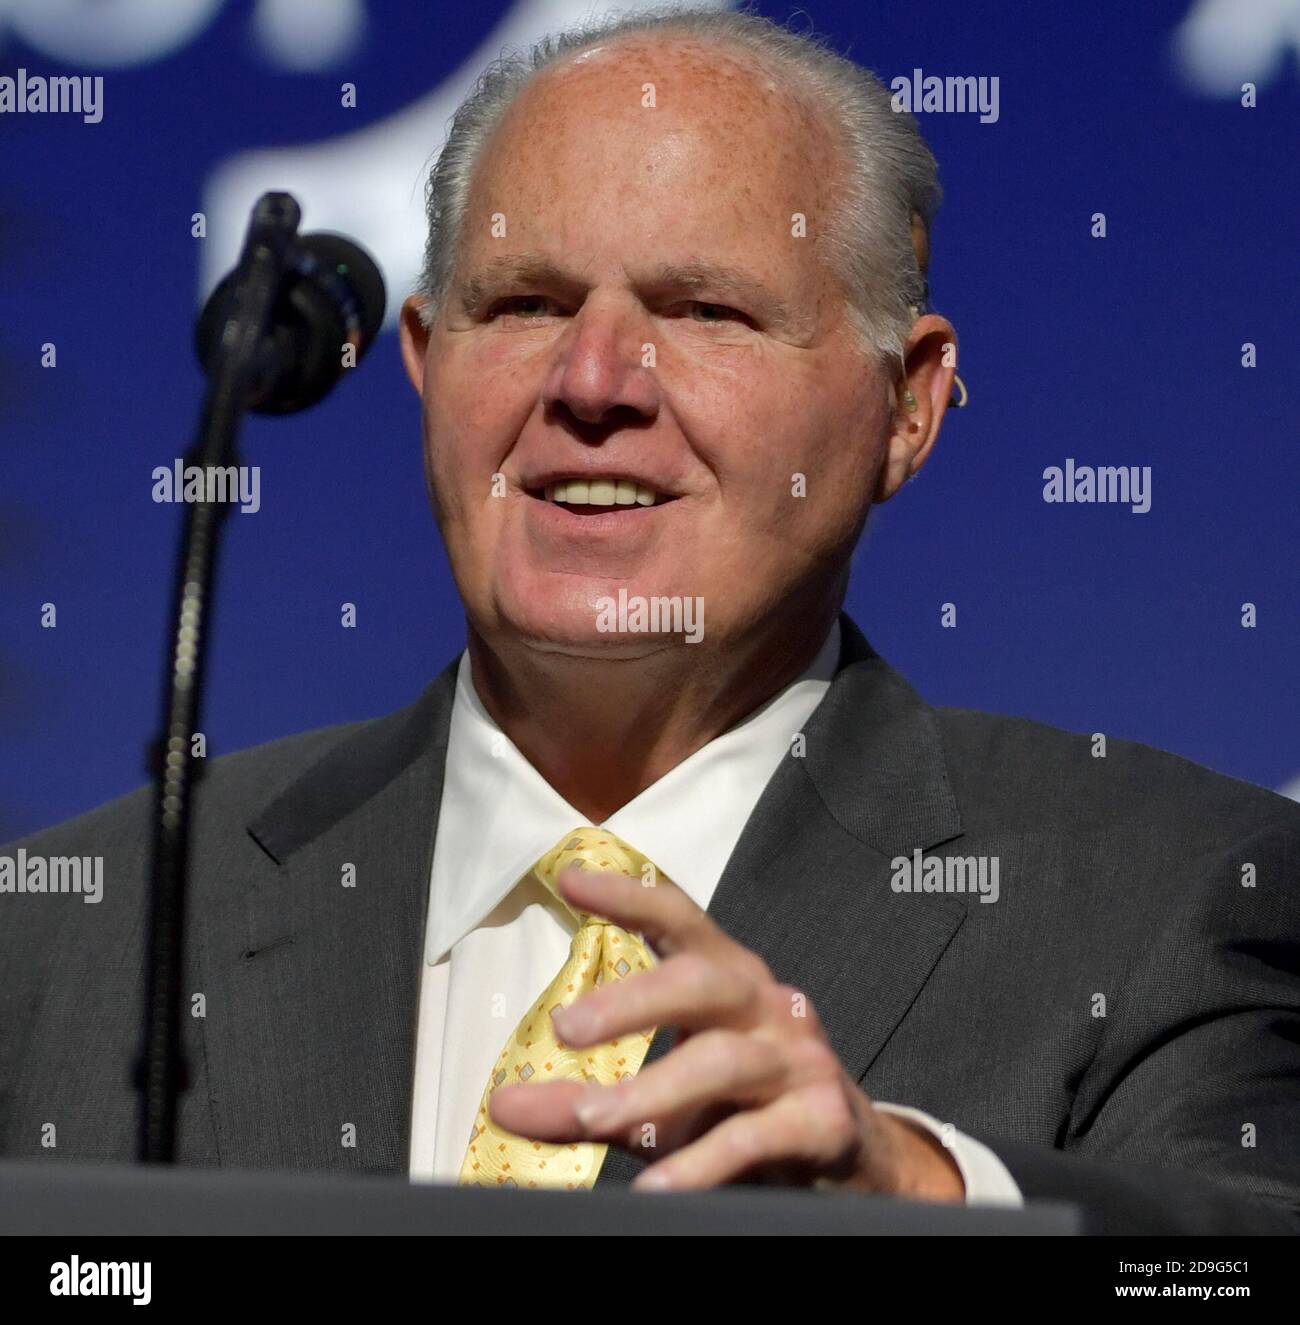 WEST PALM BEACH, FL - DECEMBER 21: Rush Limbaugh speaks at the 2019 Turning Point USA Student Action Summit - Day 3 at the Palm Beach County Convention Center on December 20, 2019 in West Palm Beach, Florida.  People:  Rush Limbaugh Credit: Hoo-me / MediaPunch Stock Photo